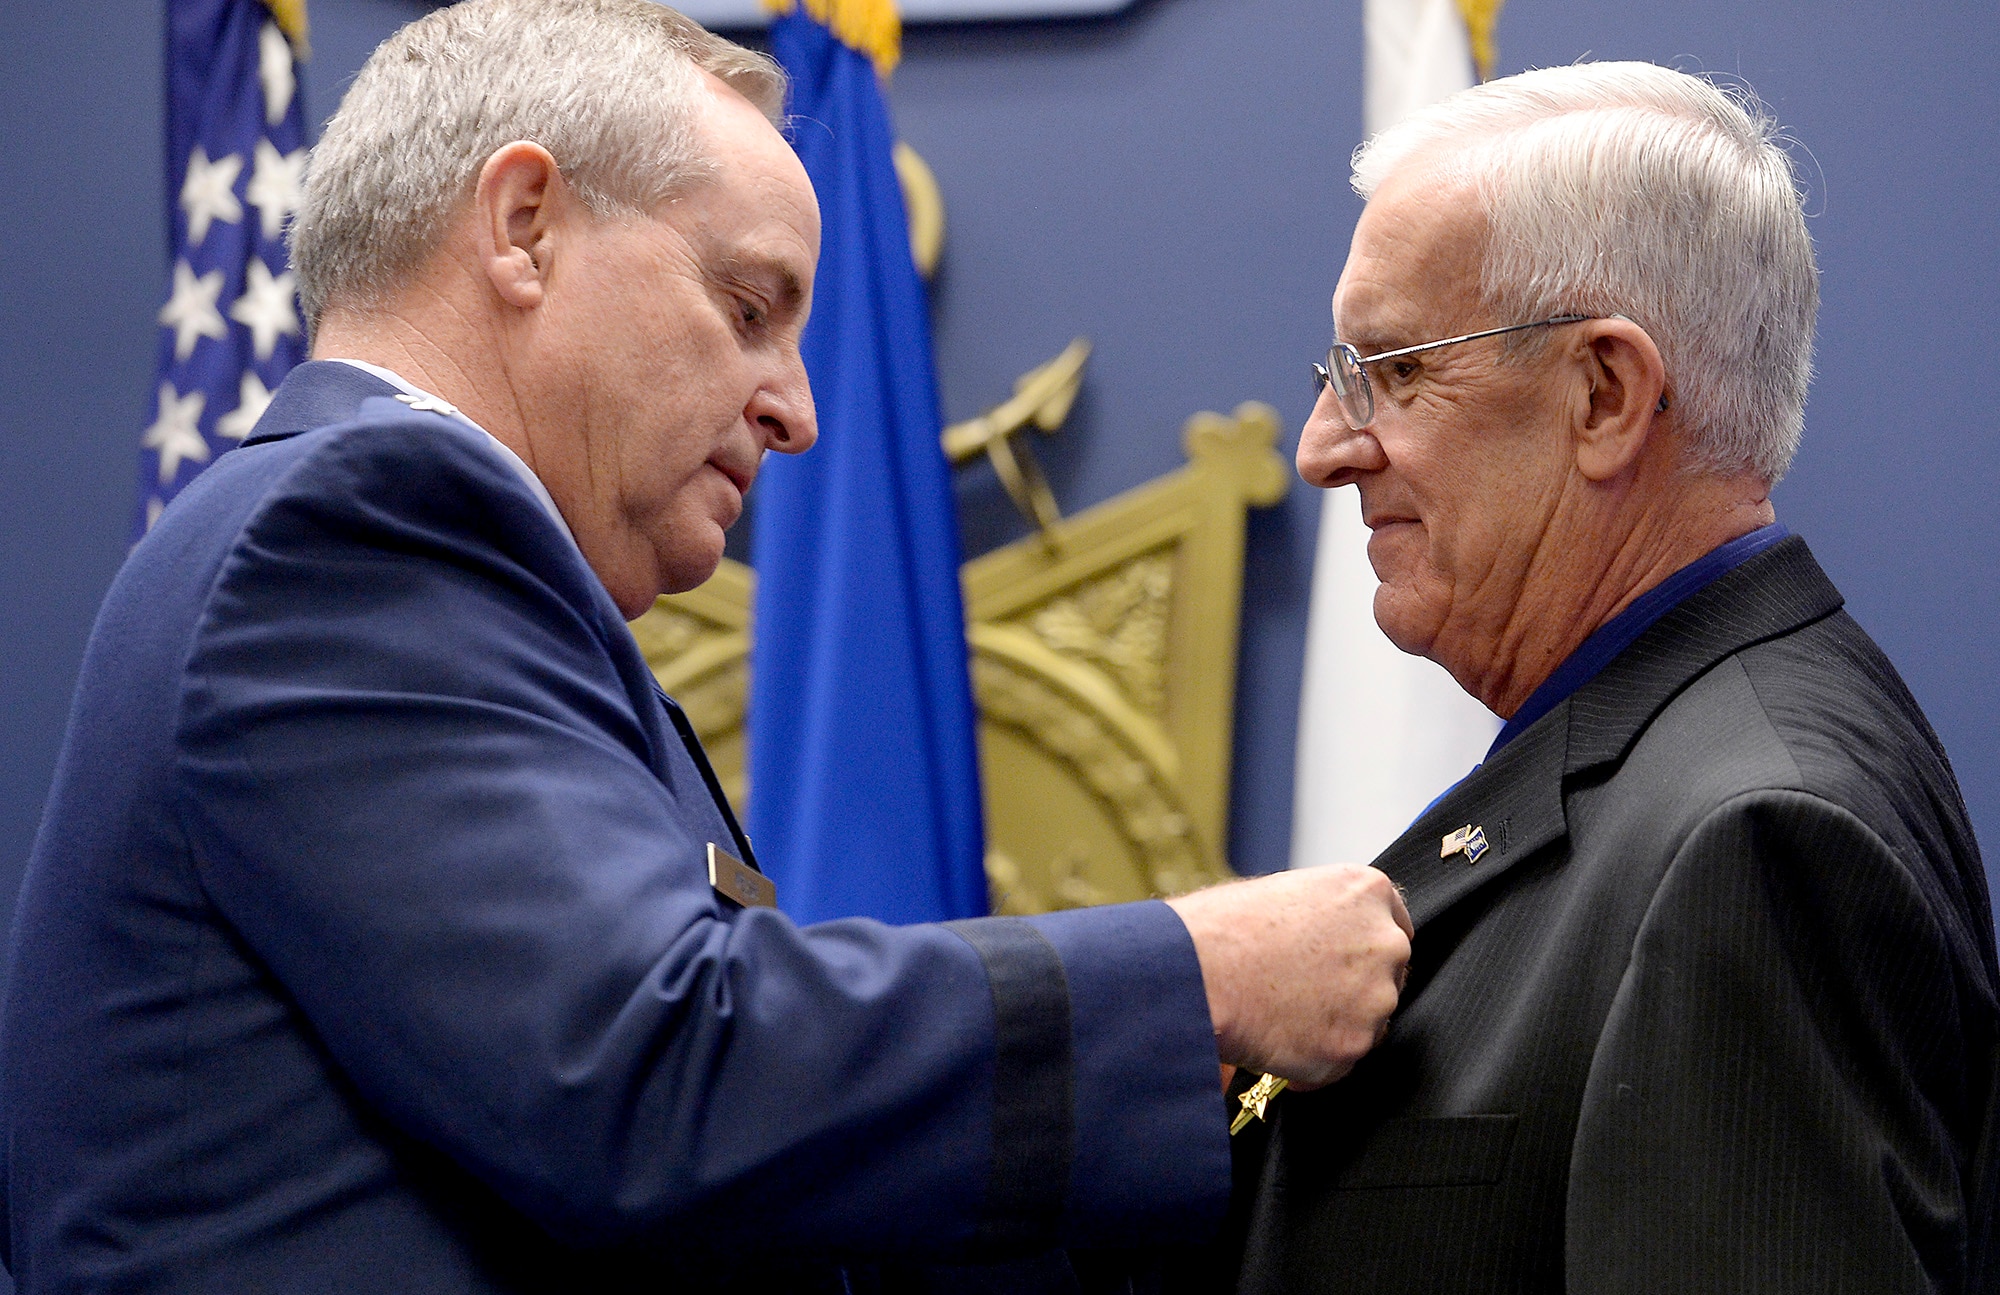 Air Force Chief of Staff Gen. Mark A. Welsh III pins the Silver Star to retired Chief Master Sgt. Ronald W. Brodeur during a ceremony at the Pentagon in Washington D.C., Dec. 17, 2015. Brodeur received the medal for his gallant action in Vietnam. (U.S. Air Force photo/Scott M. Ash)